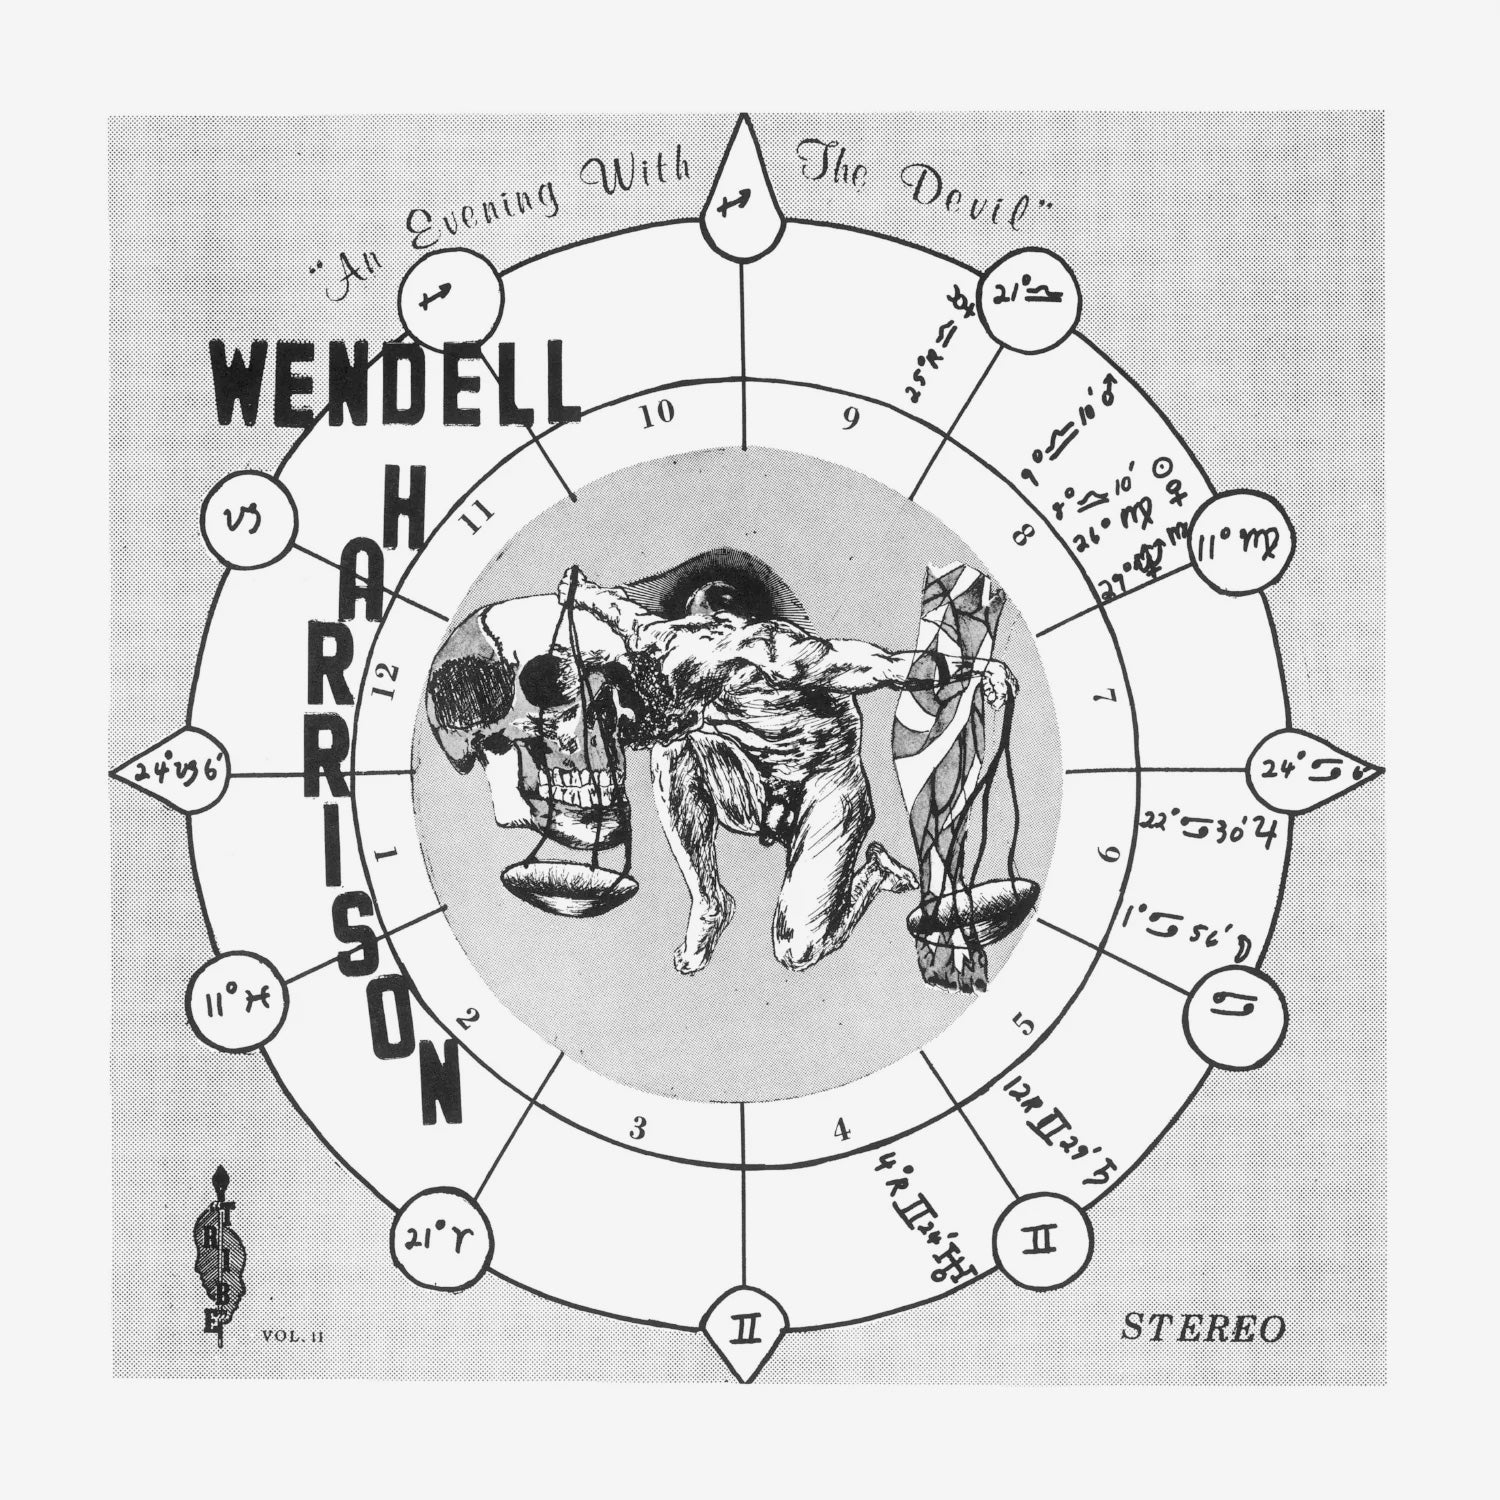 Wendell Harrison - An Evening with the Devil